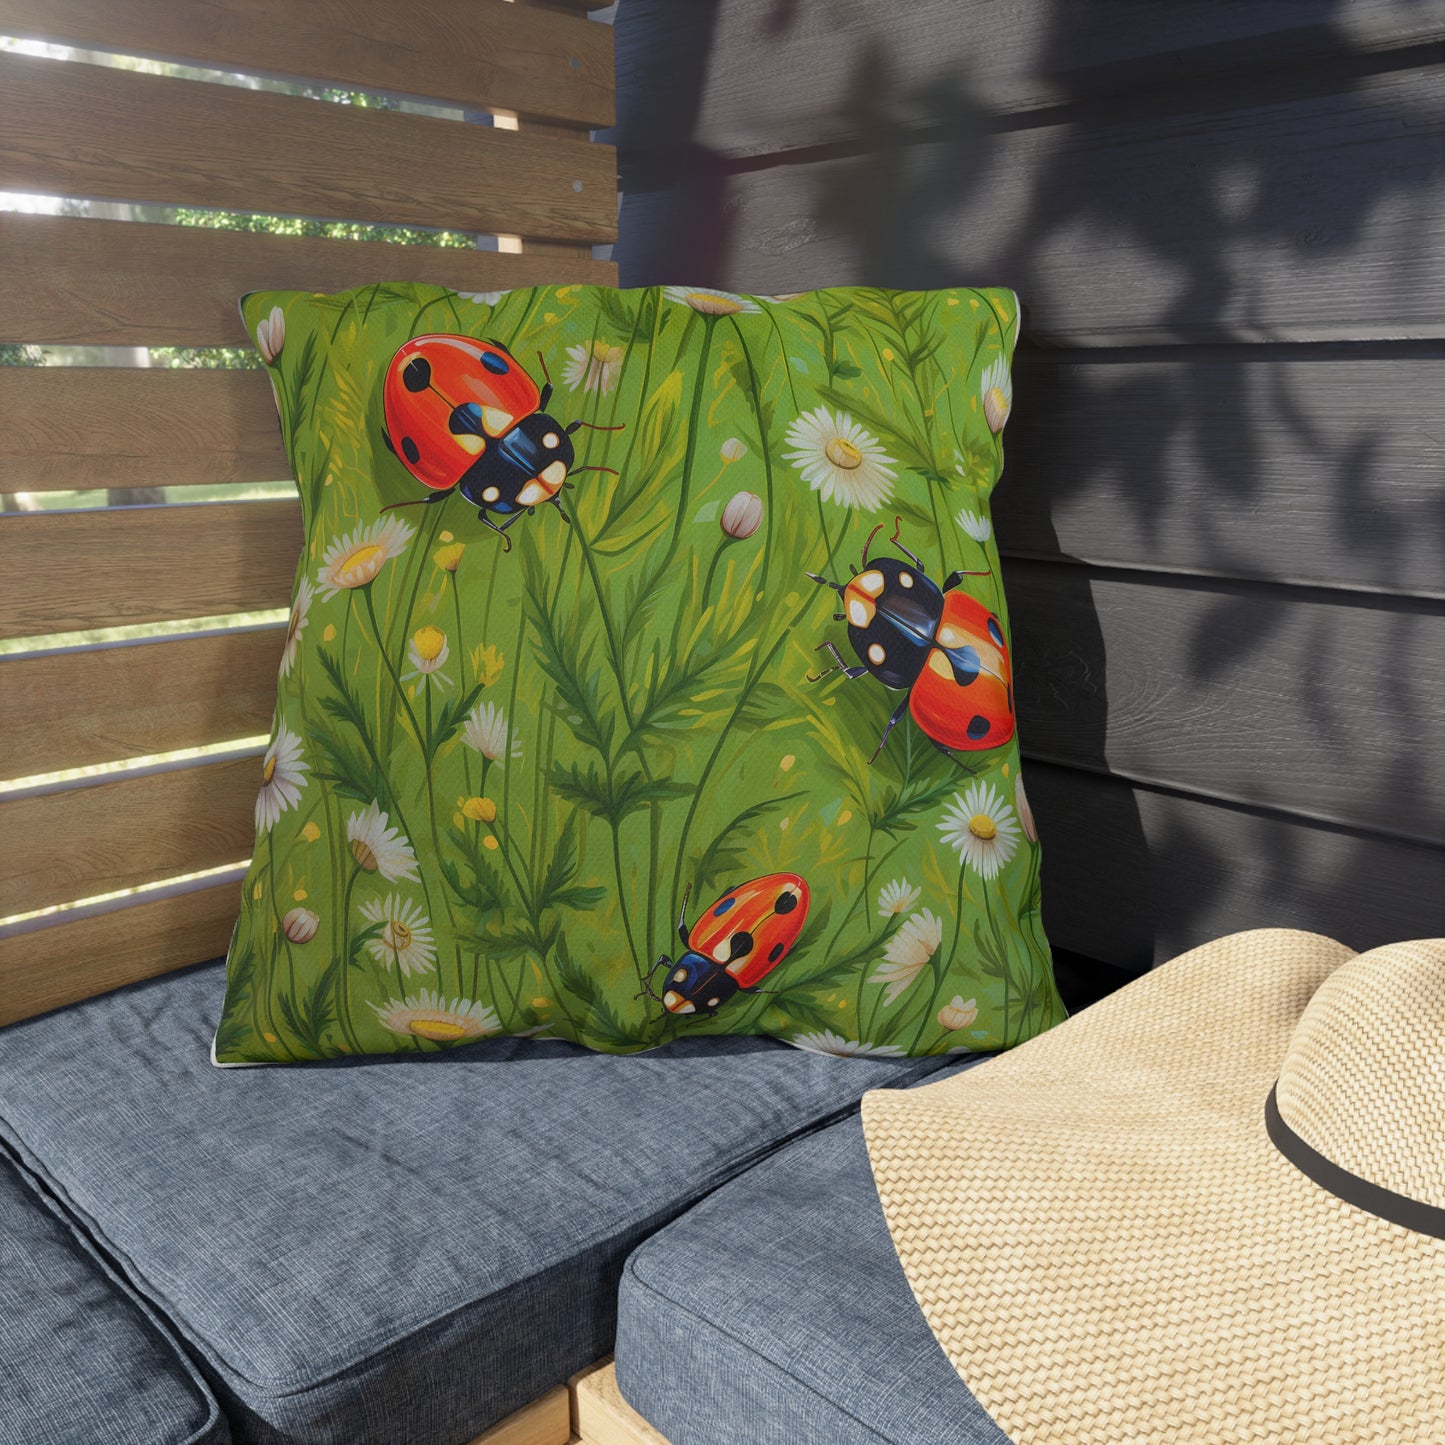 Durable Outdoor Pillow | Ladybugs & Flowers Throw Pillow from The Curated Goose